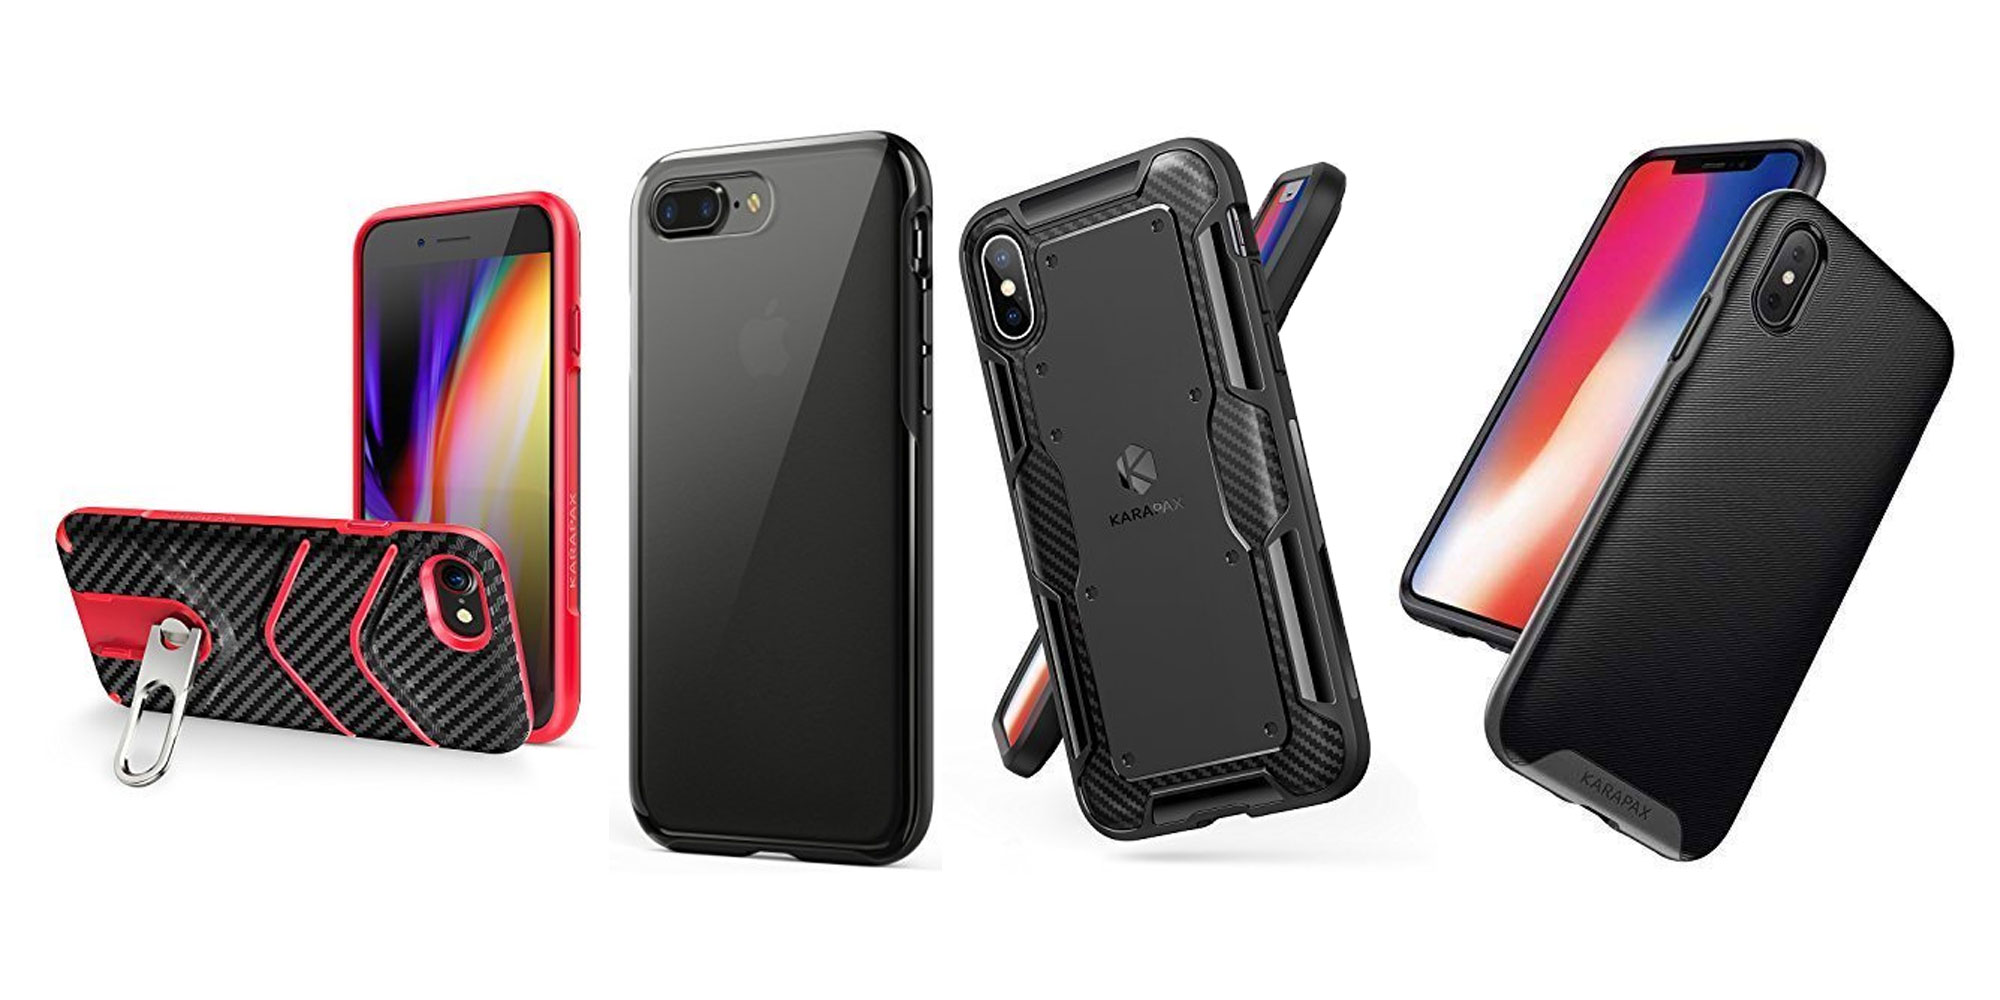 Anker Labor Day iPhone X/8/7/Plus case sale keeps your ...